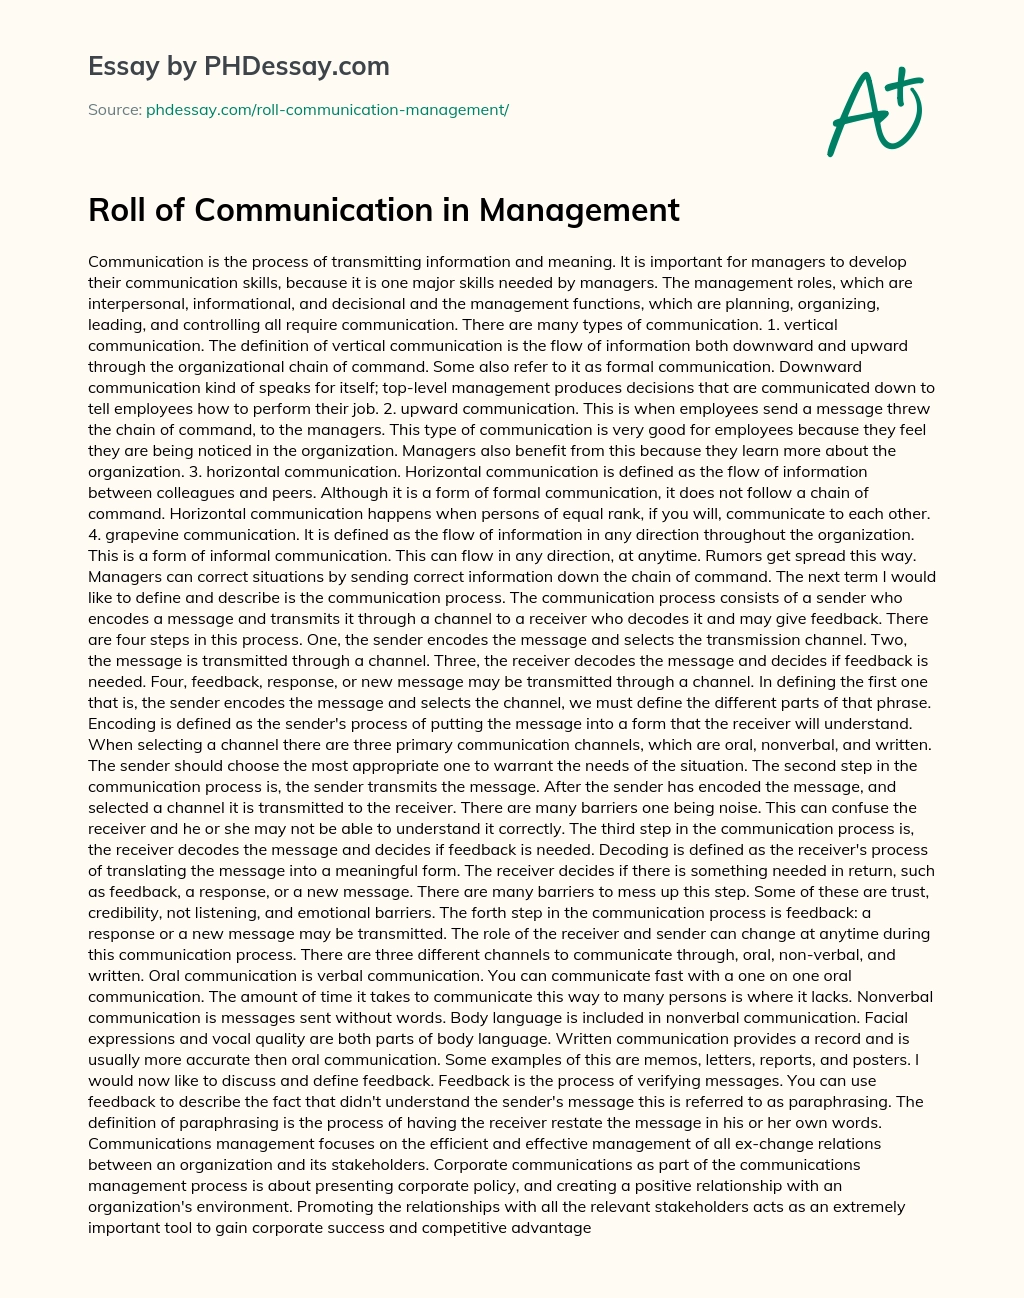 Roll of Communication in Management essay